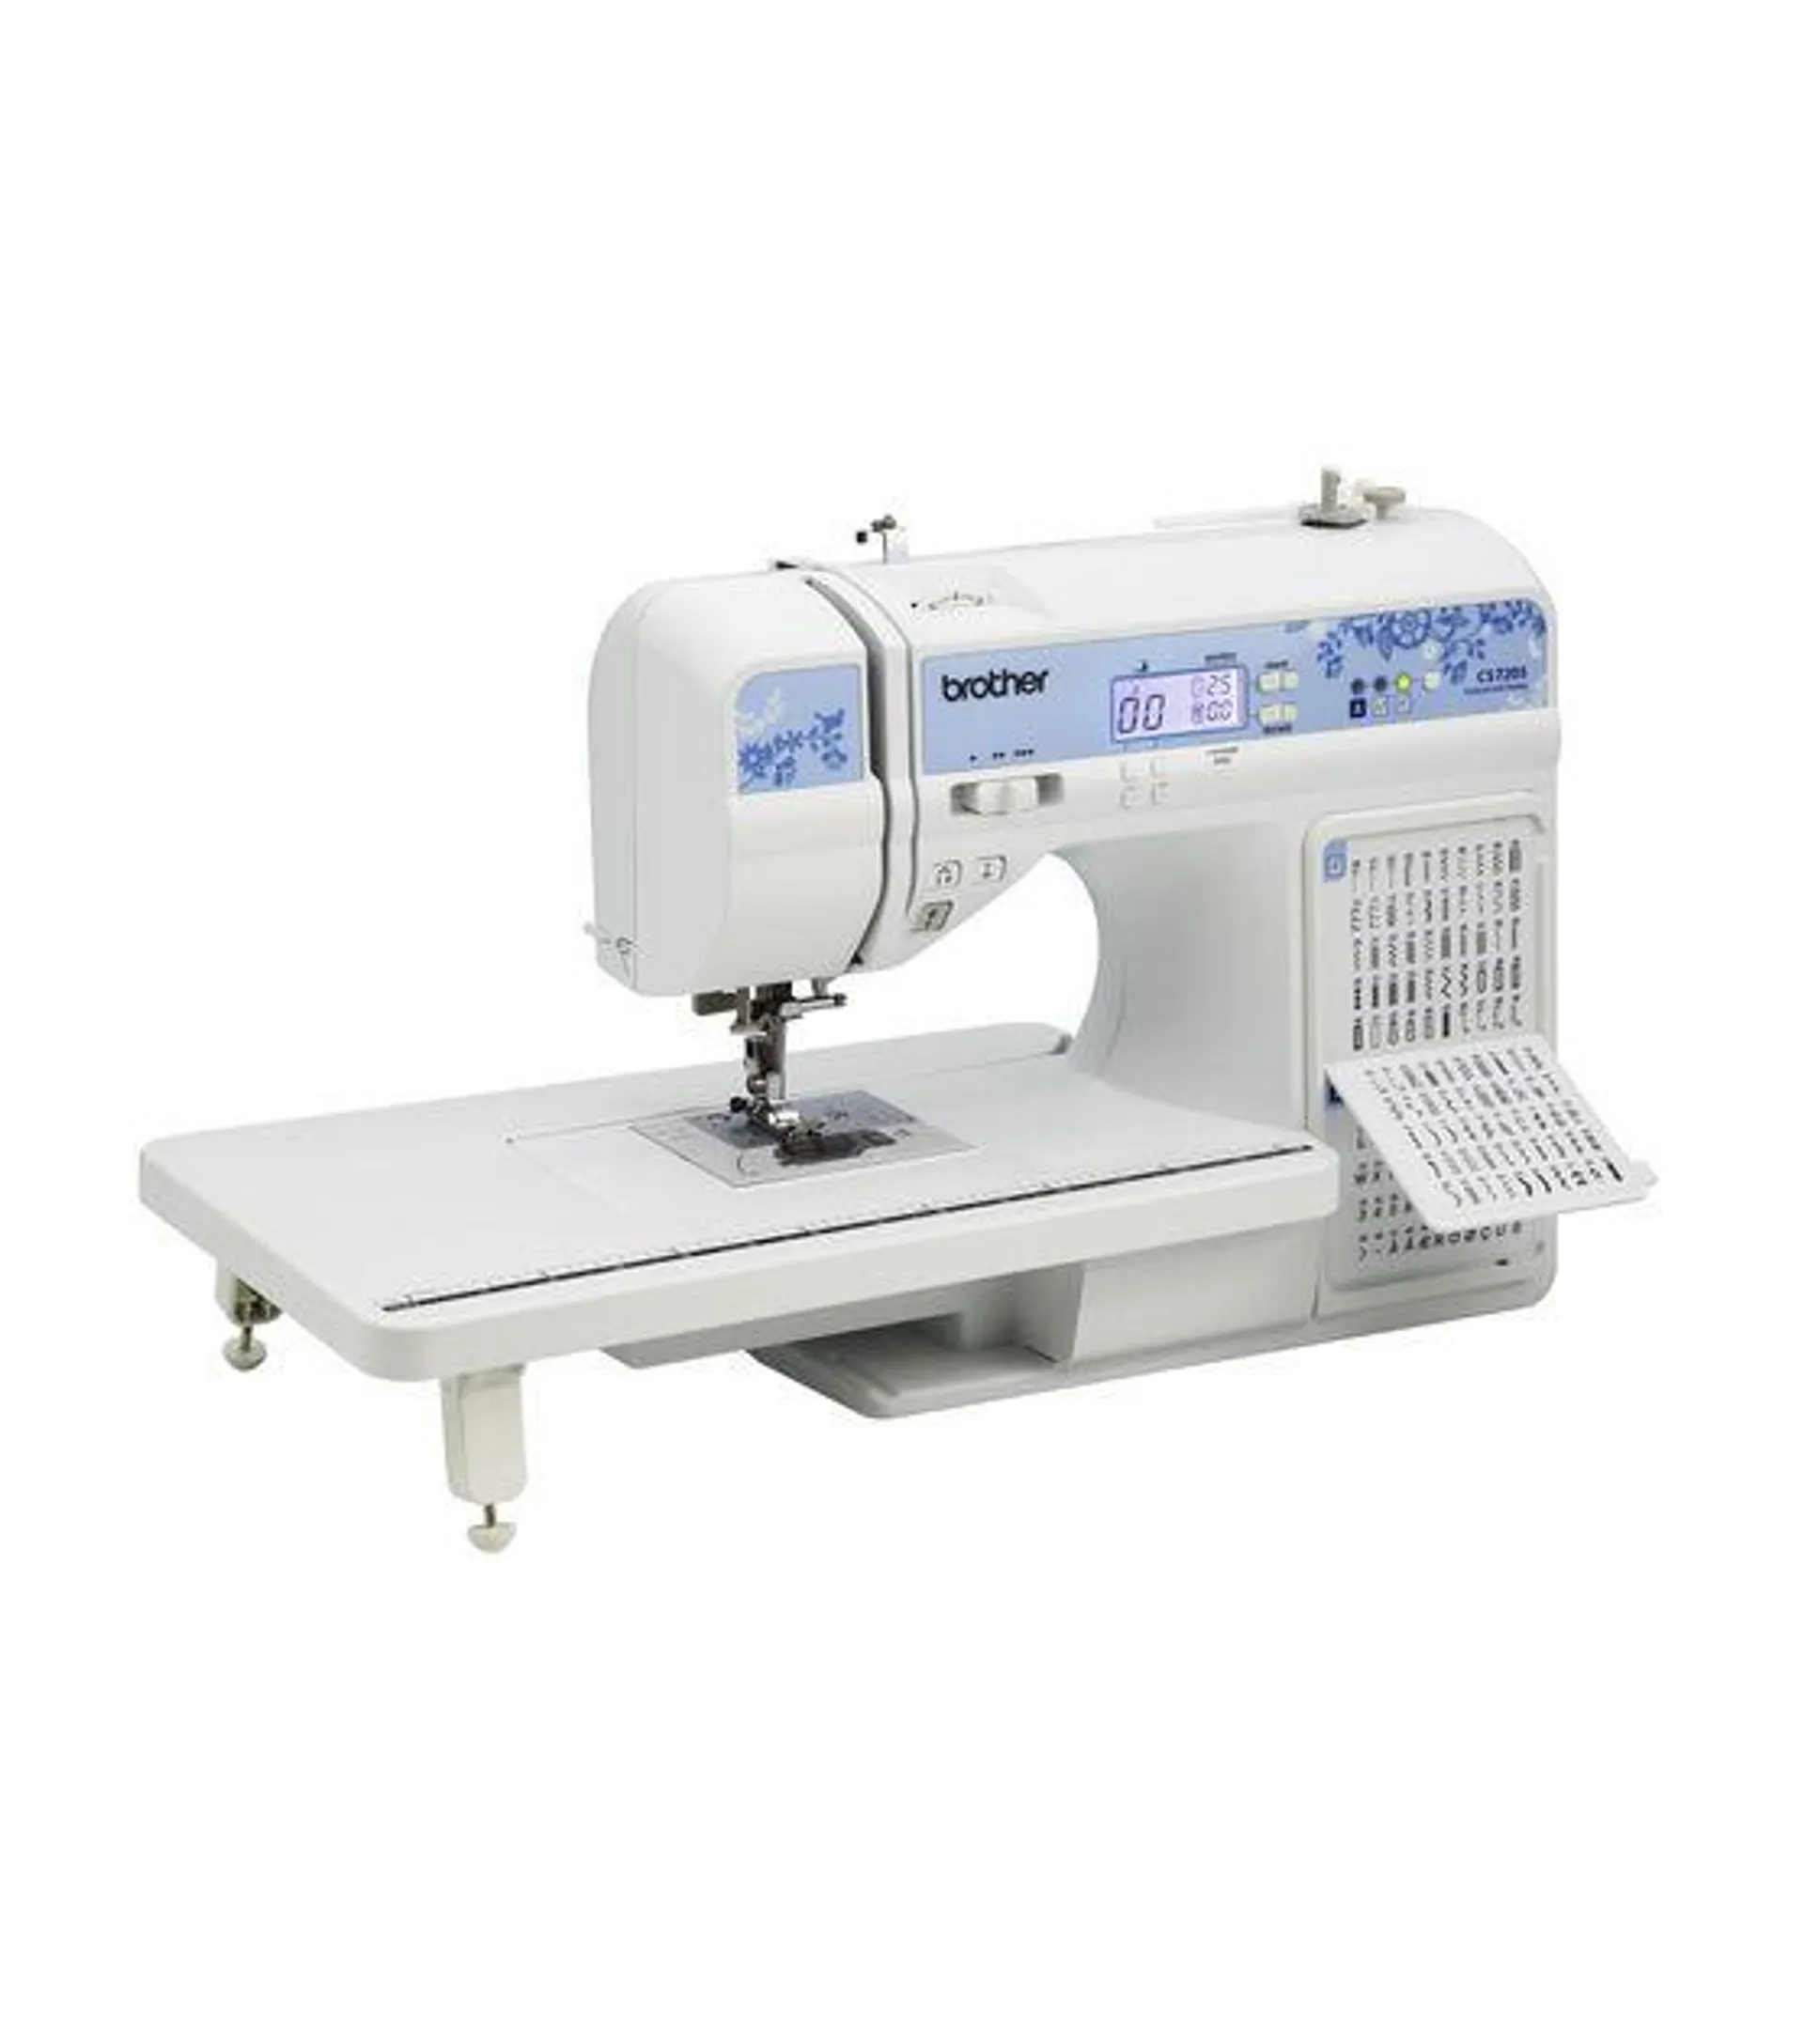 Brother CS7205 Sewing Machine with Wide Table